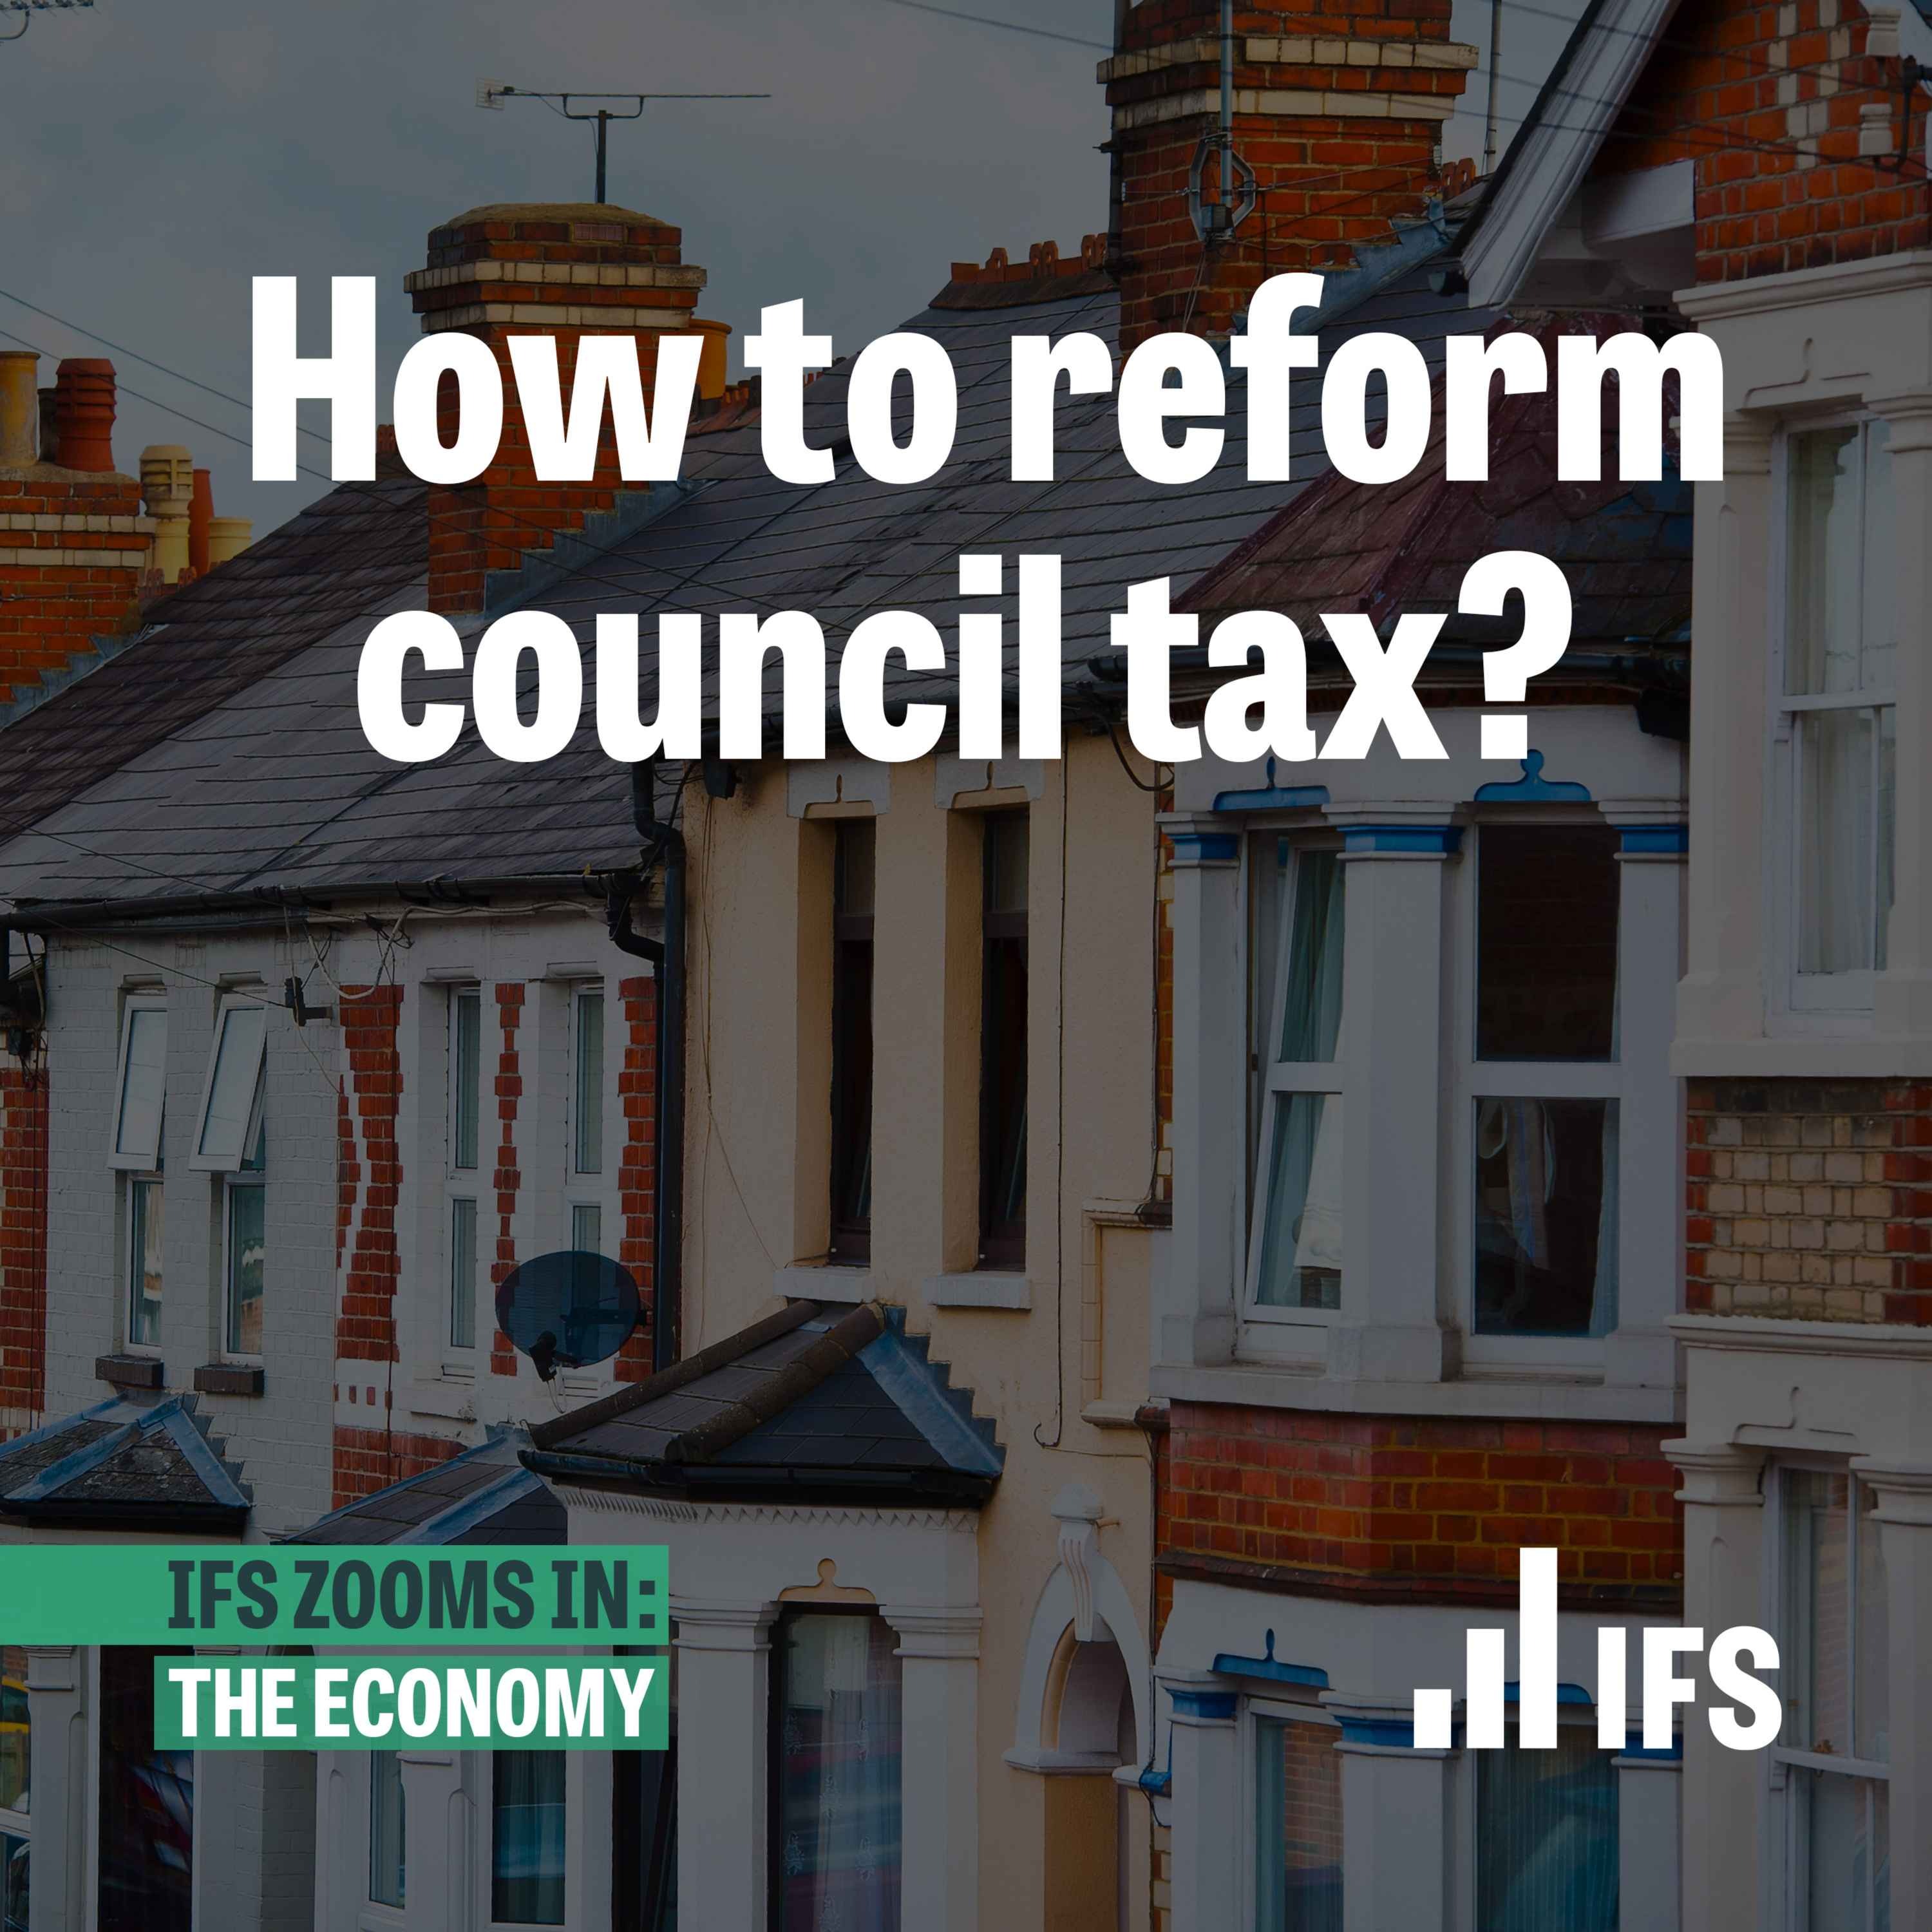 Location, location, location: how to reform council tax?